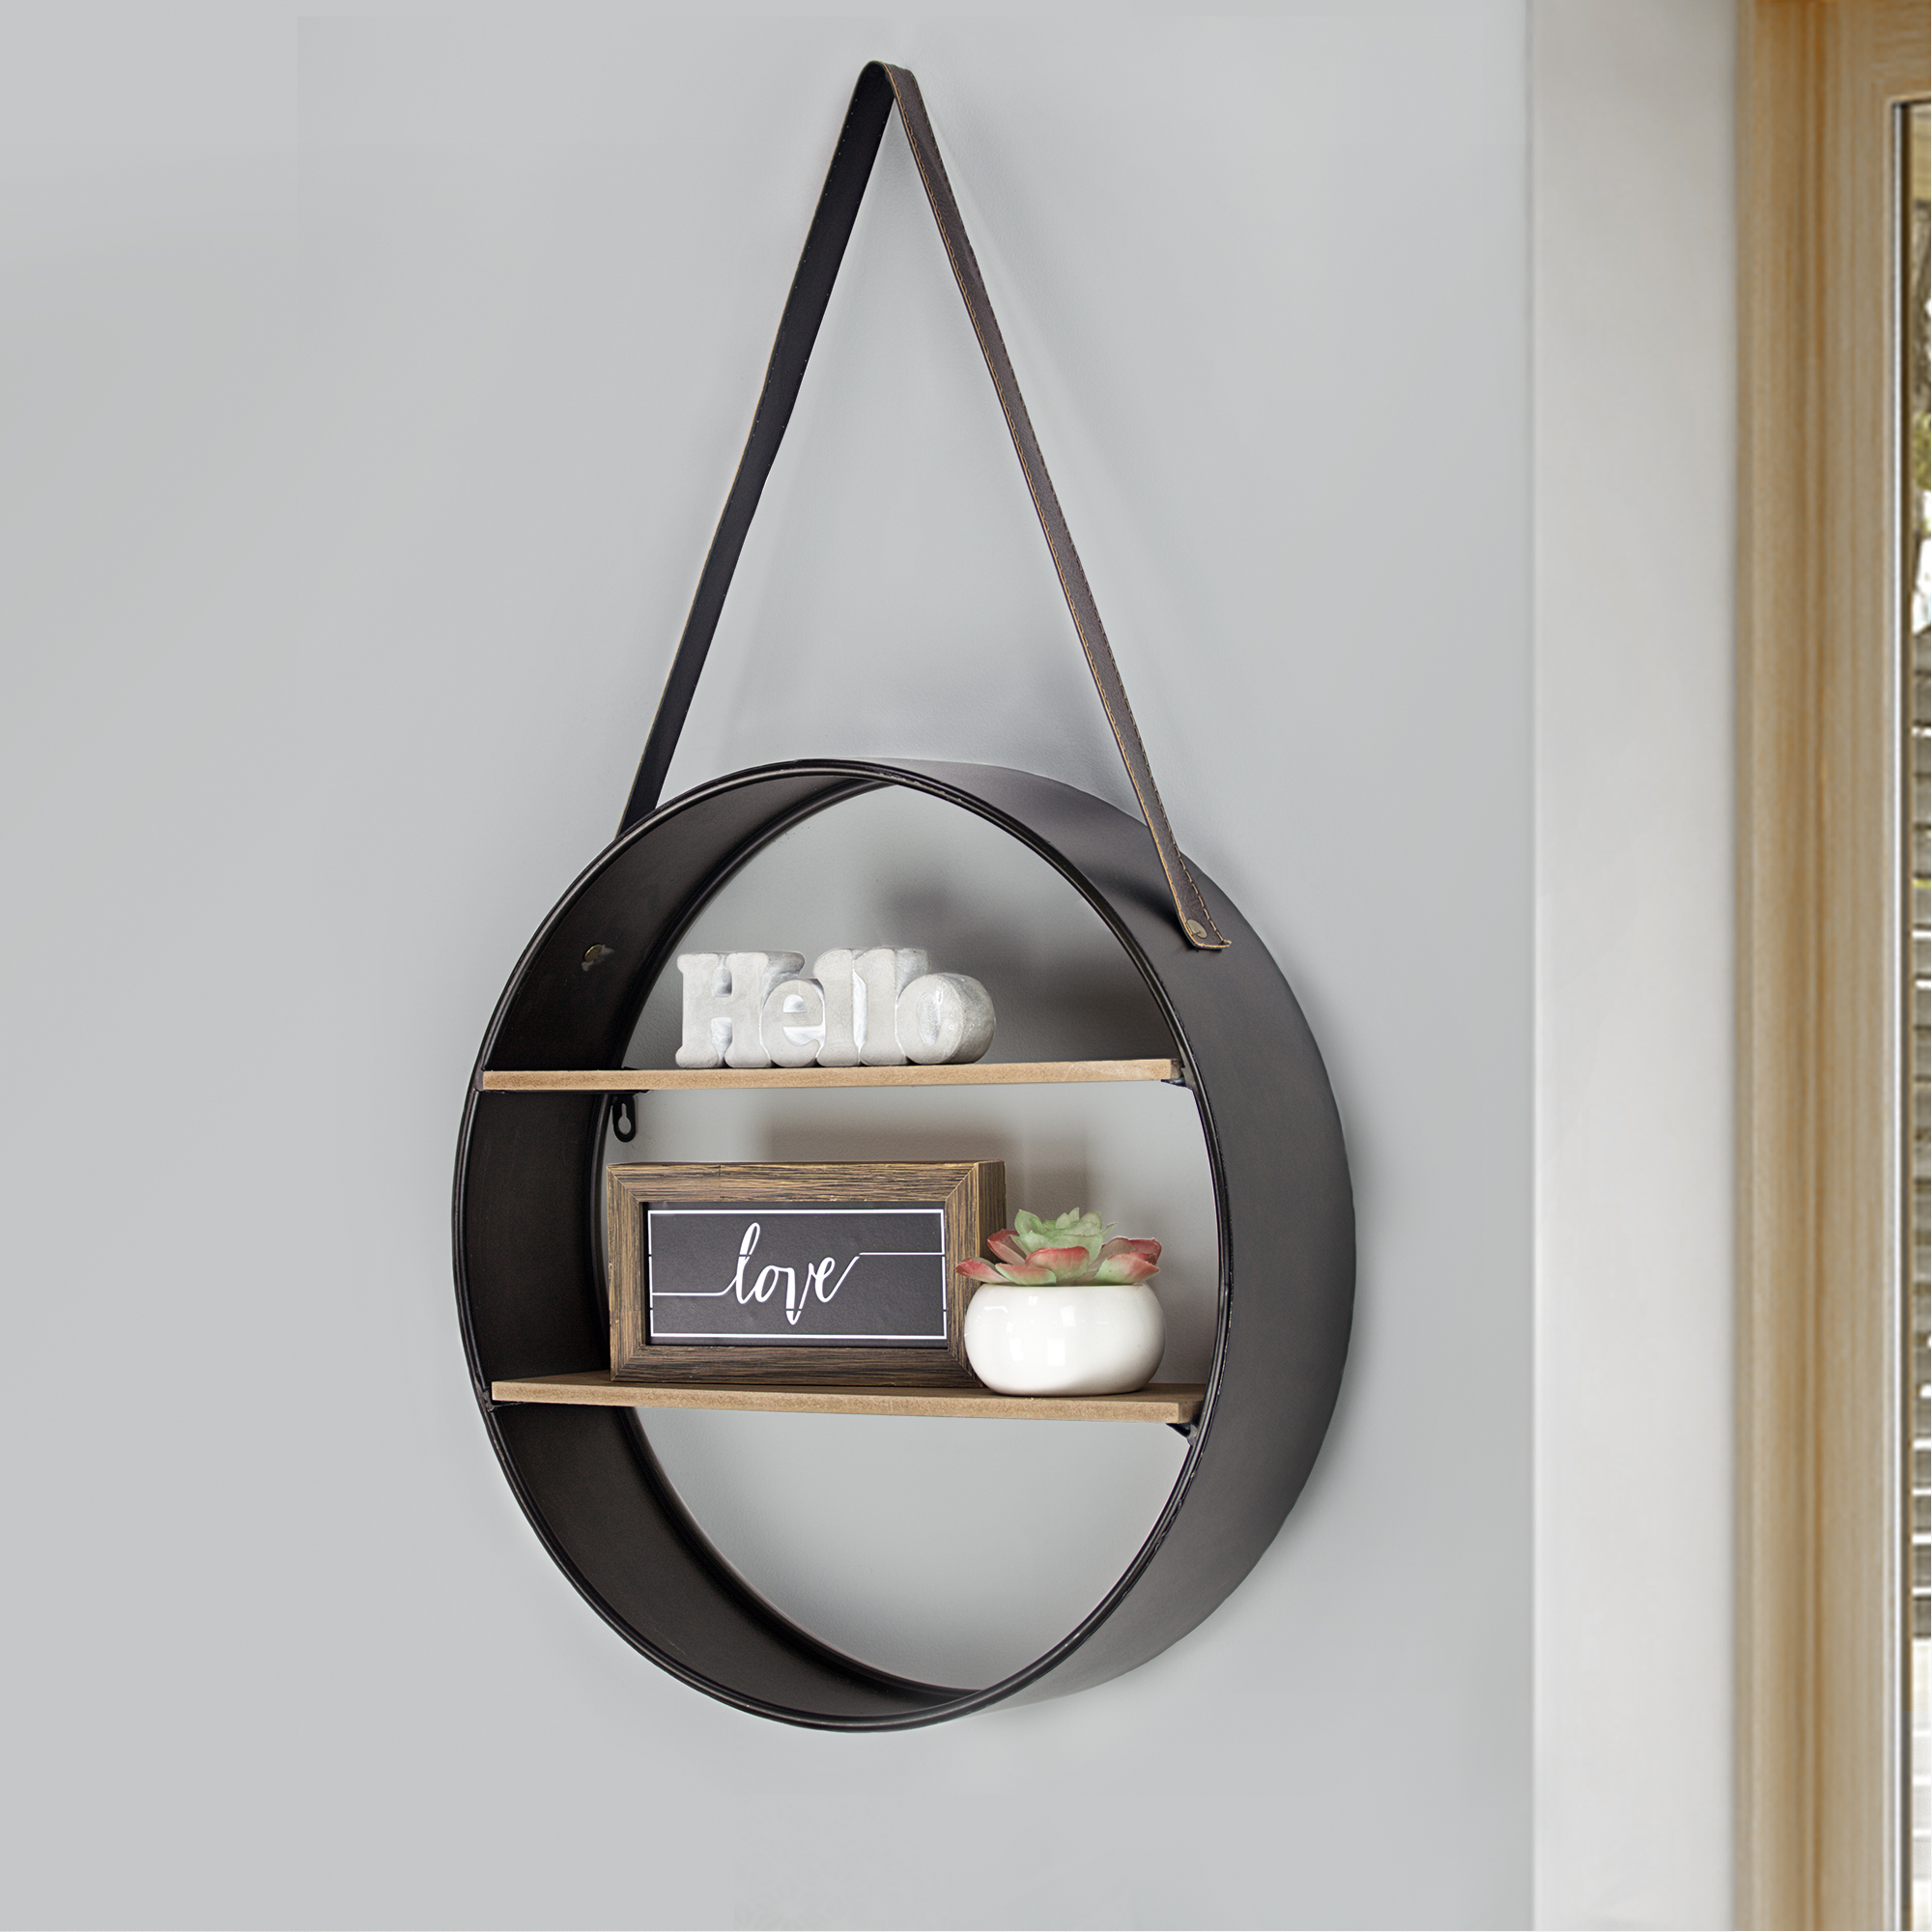 American Art Decor Metal and Wood Round Hanging Wall Shelf with Strap (33" x 19) - image 2 of 8